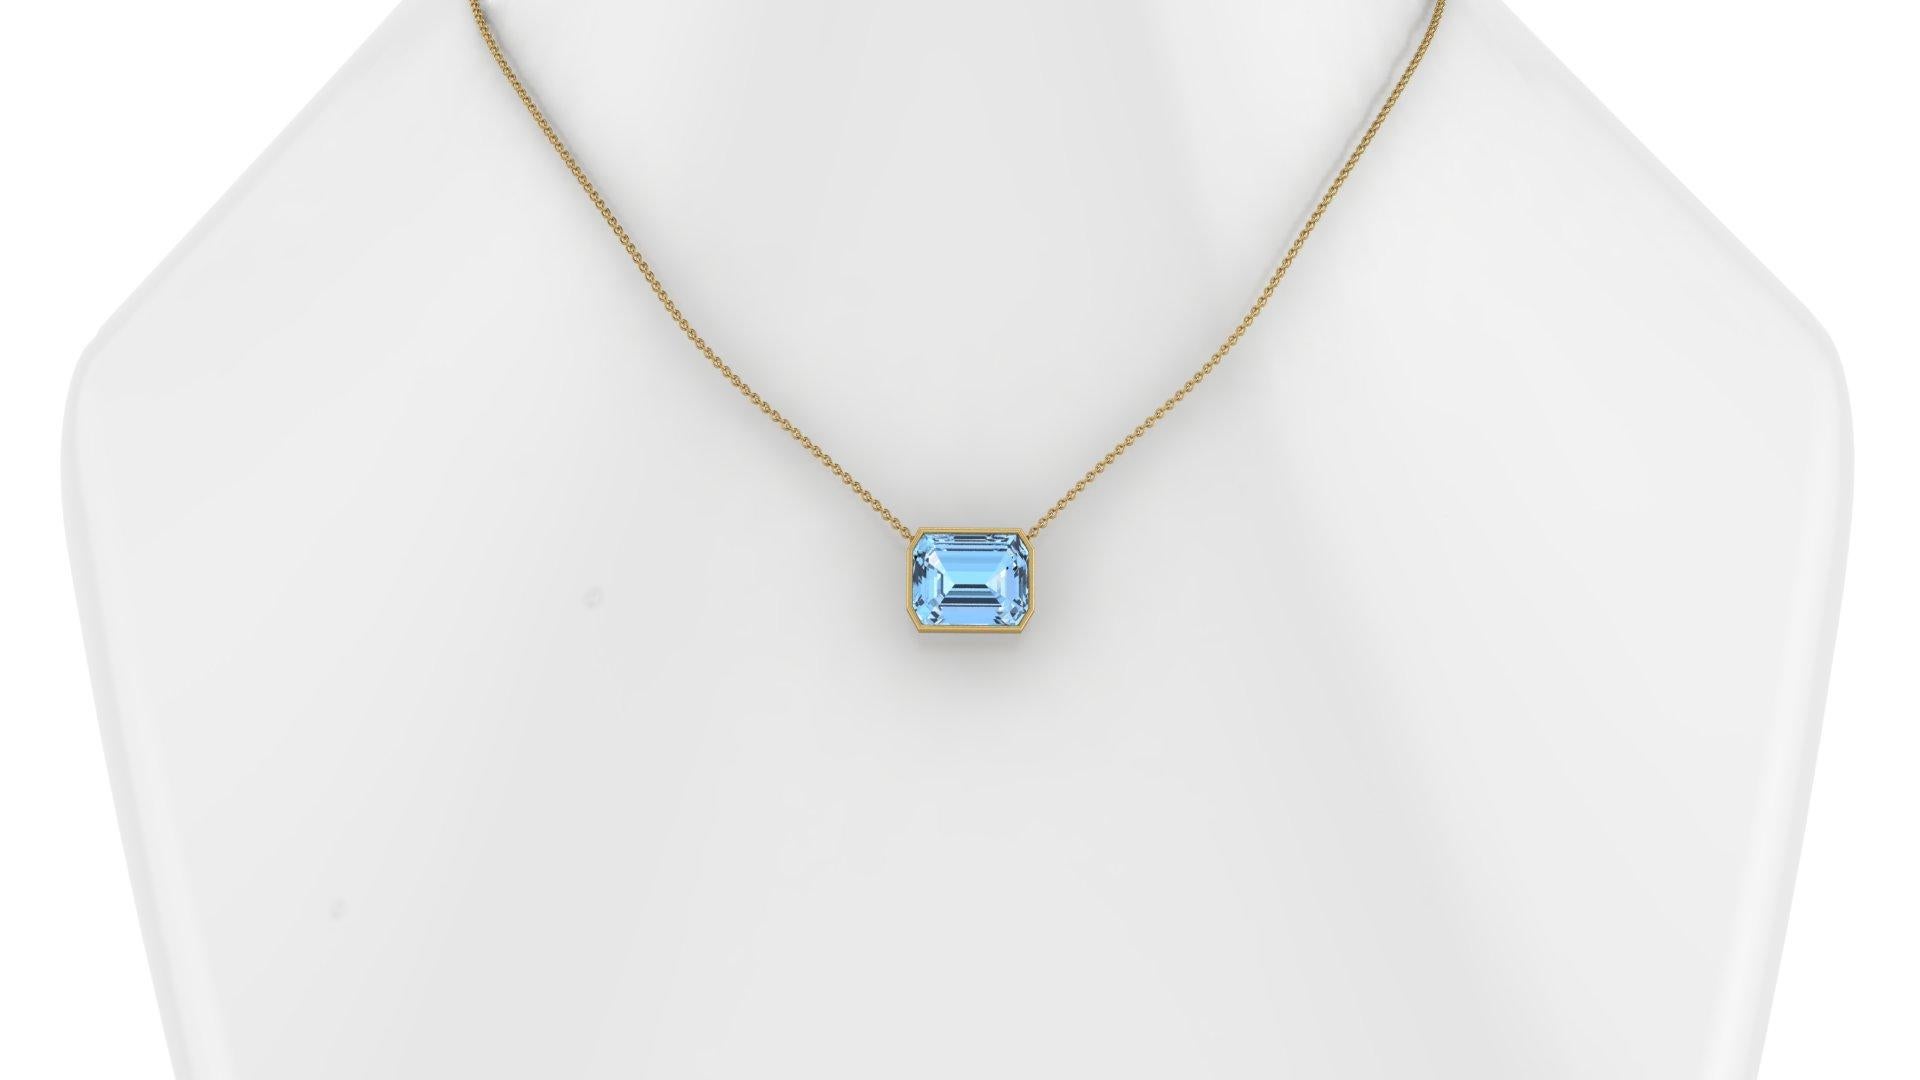 10.39 Carat Emerald cut Aquamarine in 18K Gold thin bezel Necklace Pendant
The necklace length can be adjusted at 18